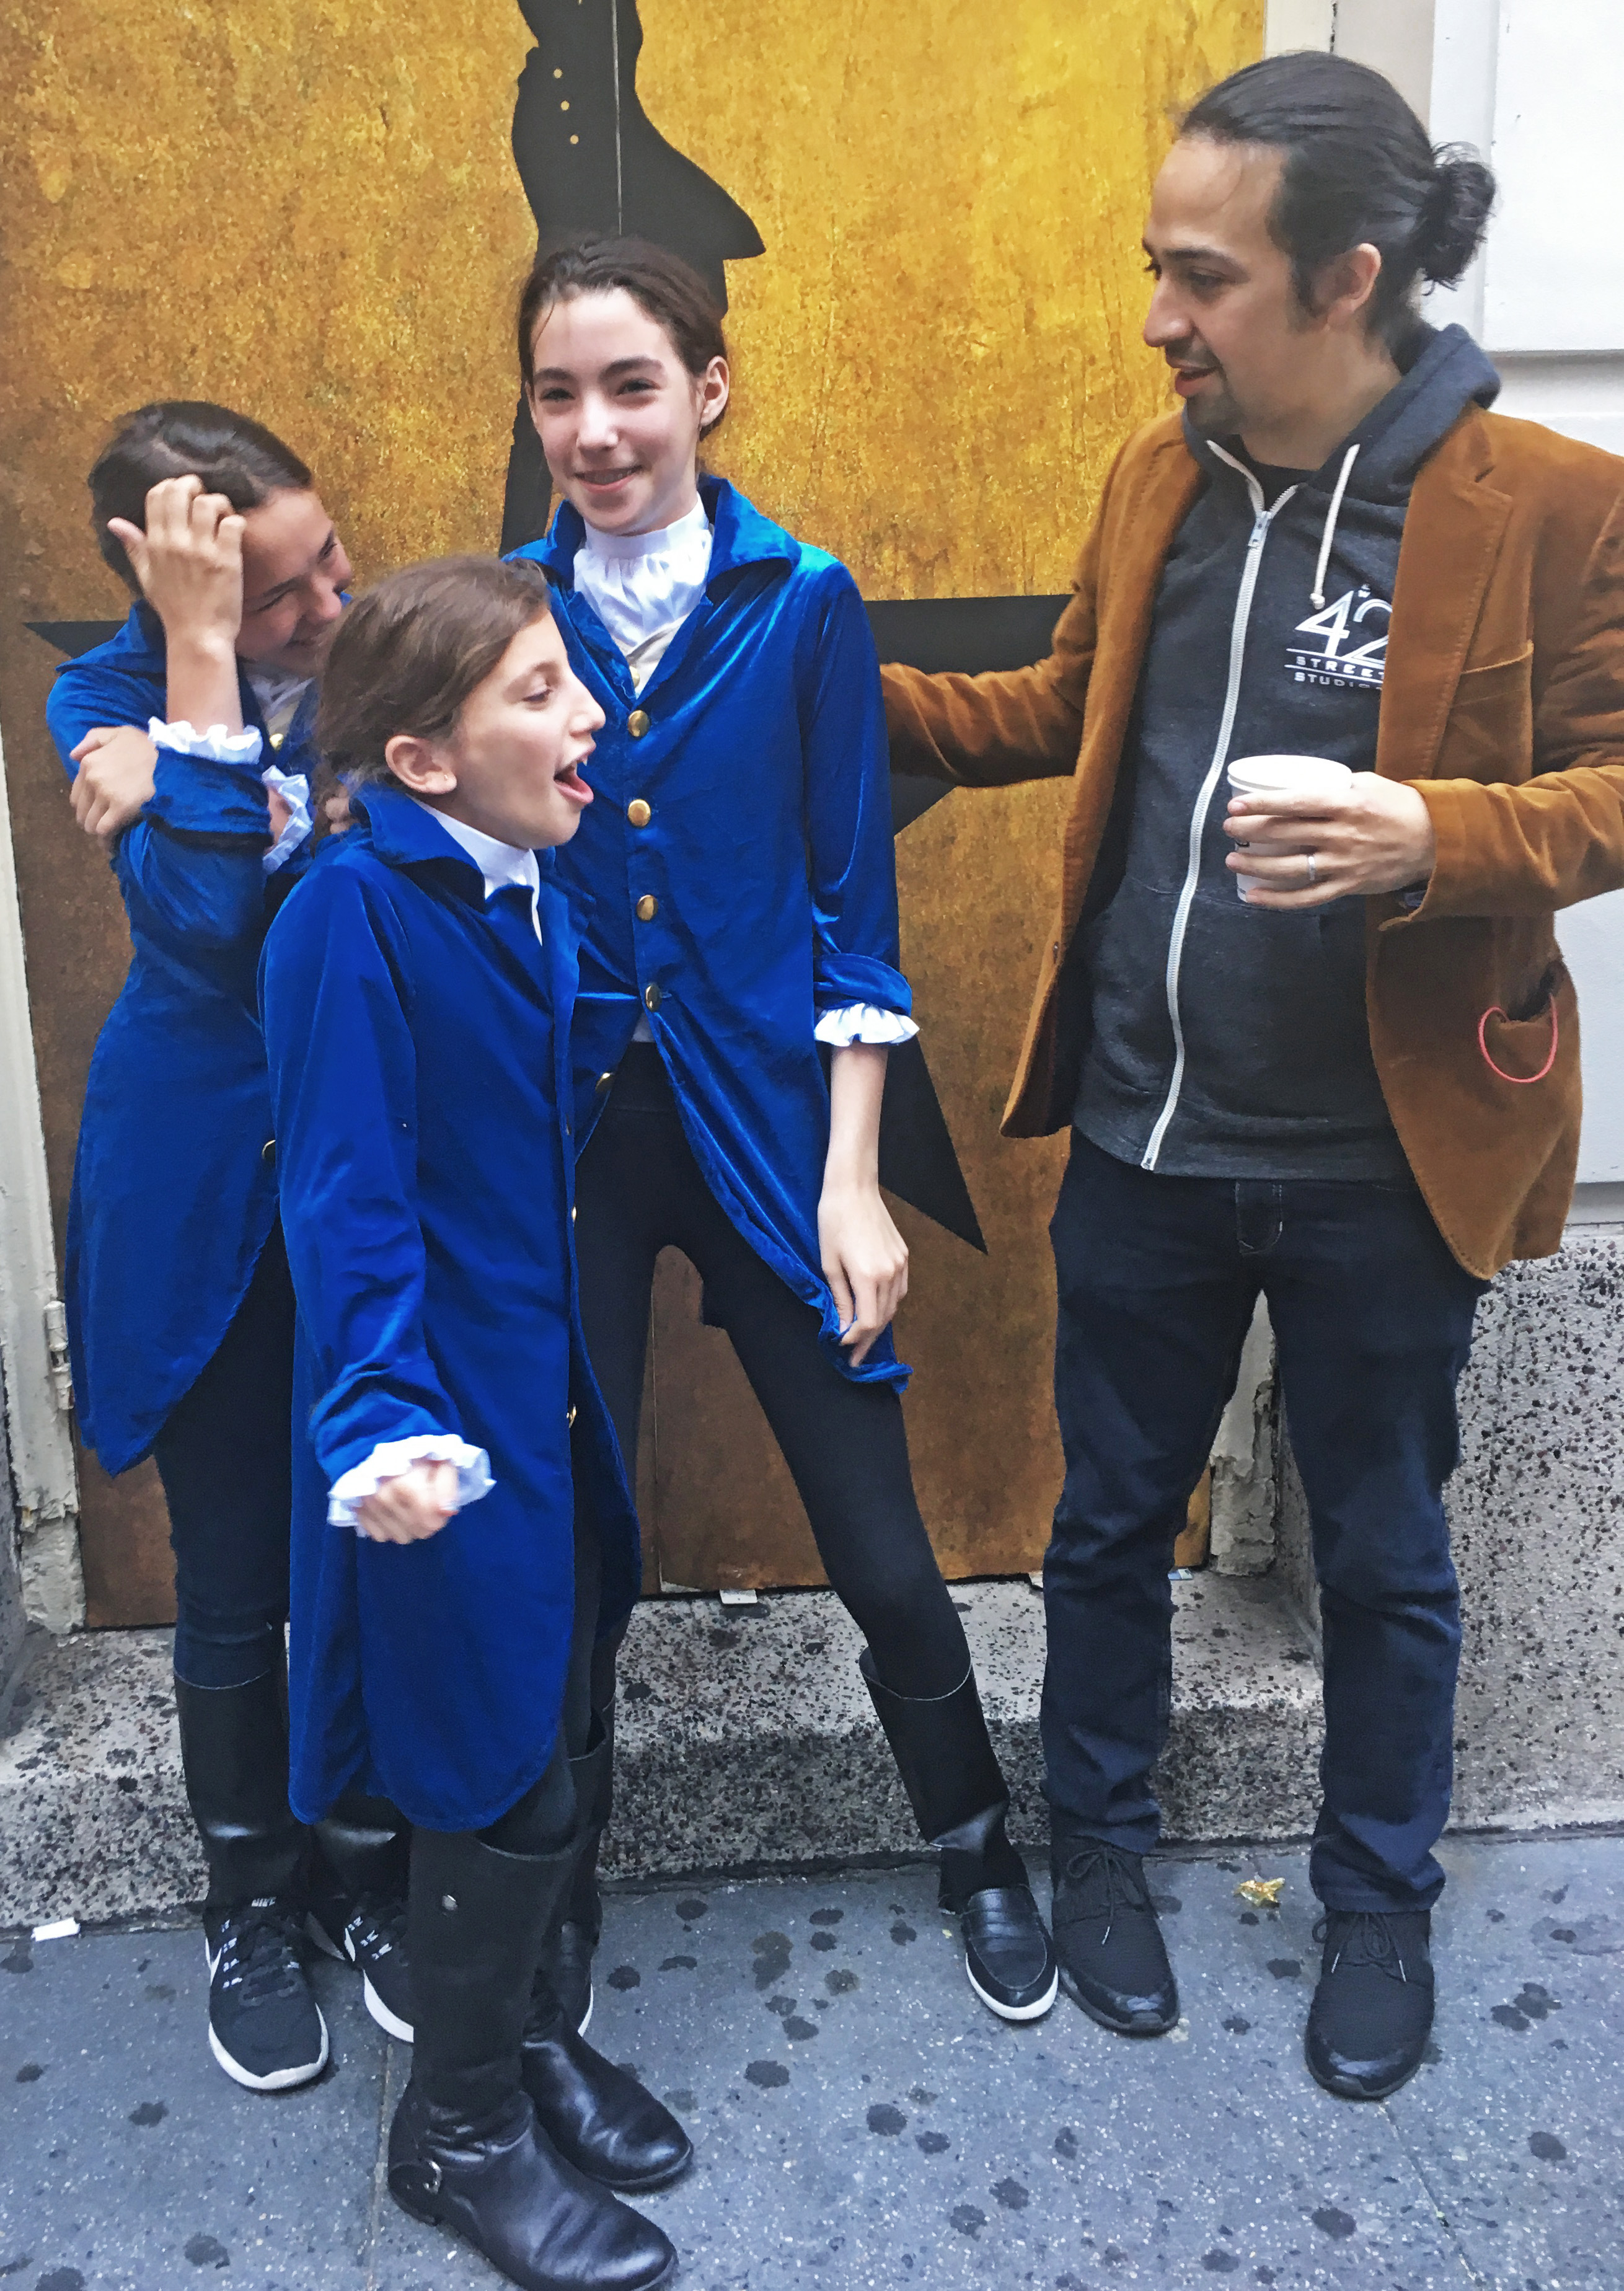 Outside the theater where Hamilton is playing, three girls meet their hero. Find out more here.